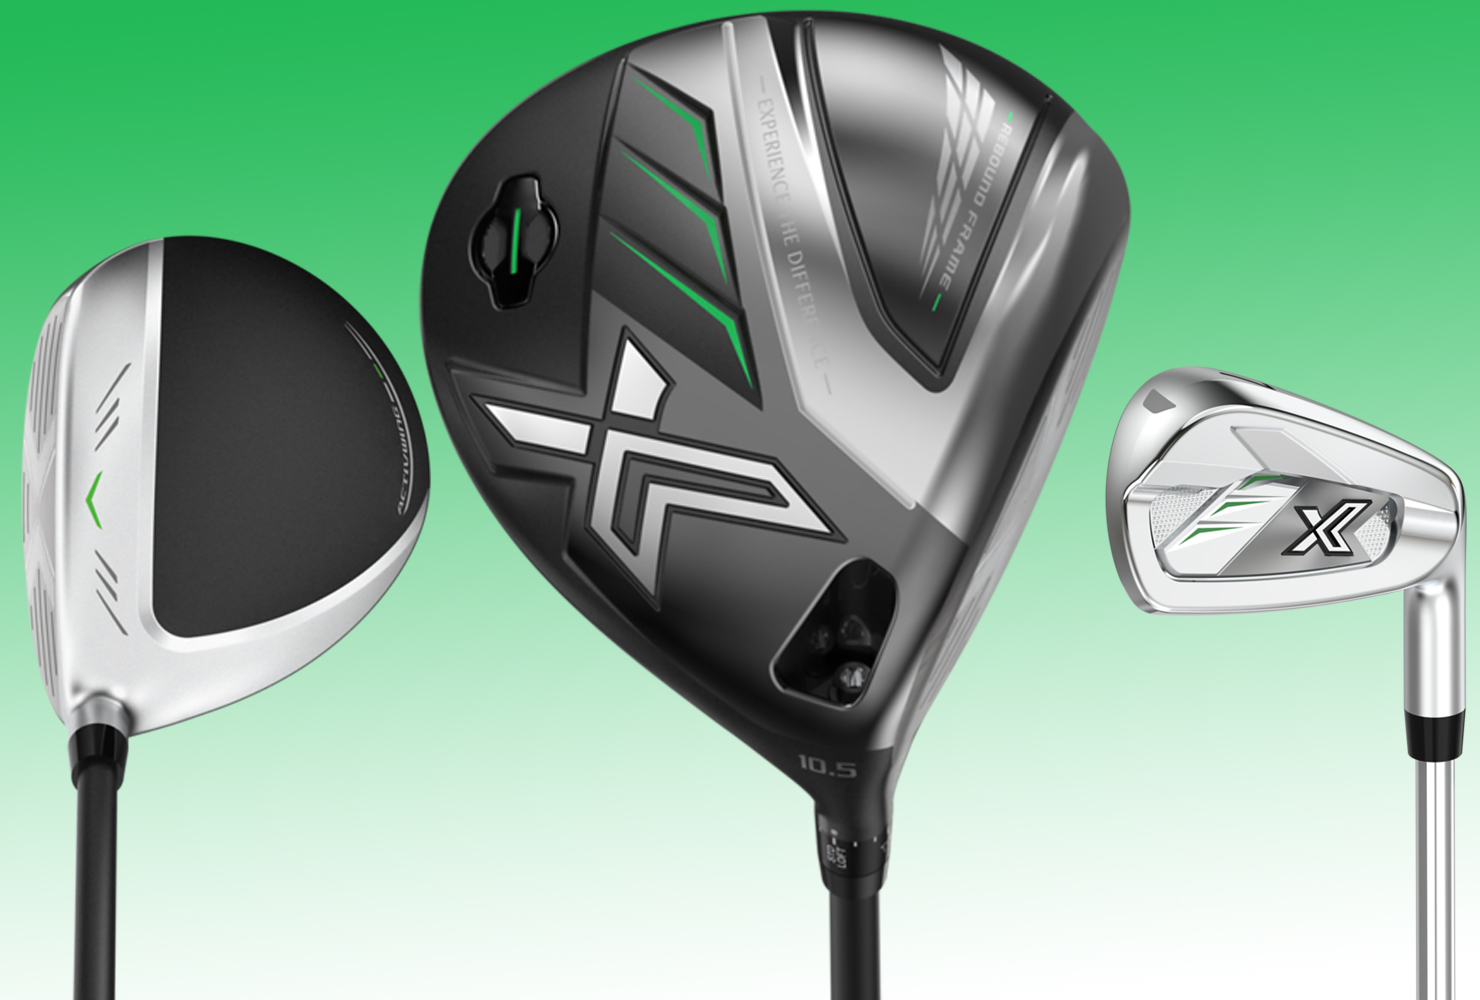 2022 XXIO X Driver, Metal Woods, Irons and More - The Hackers Paradise